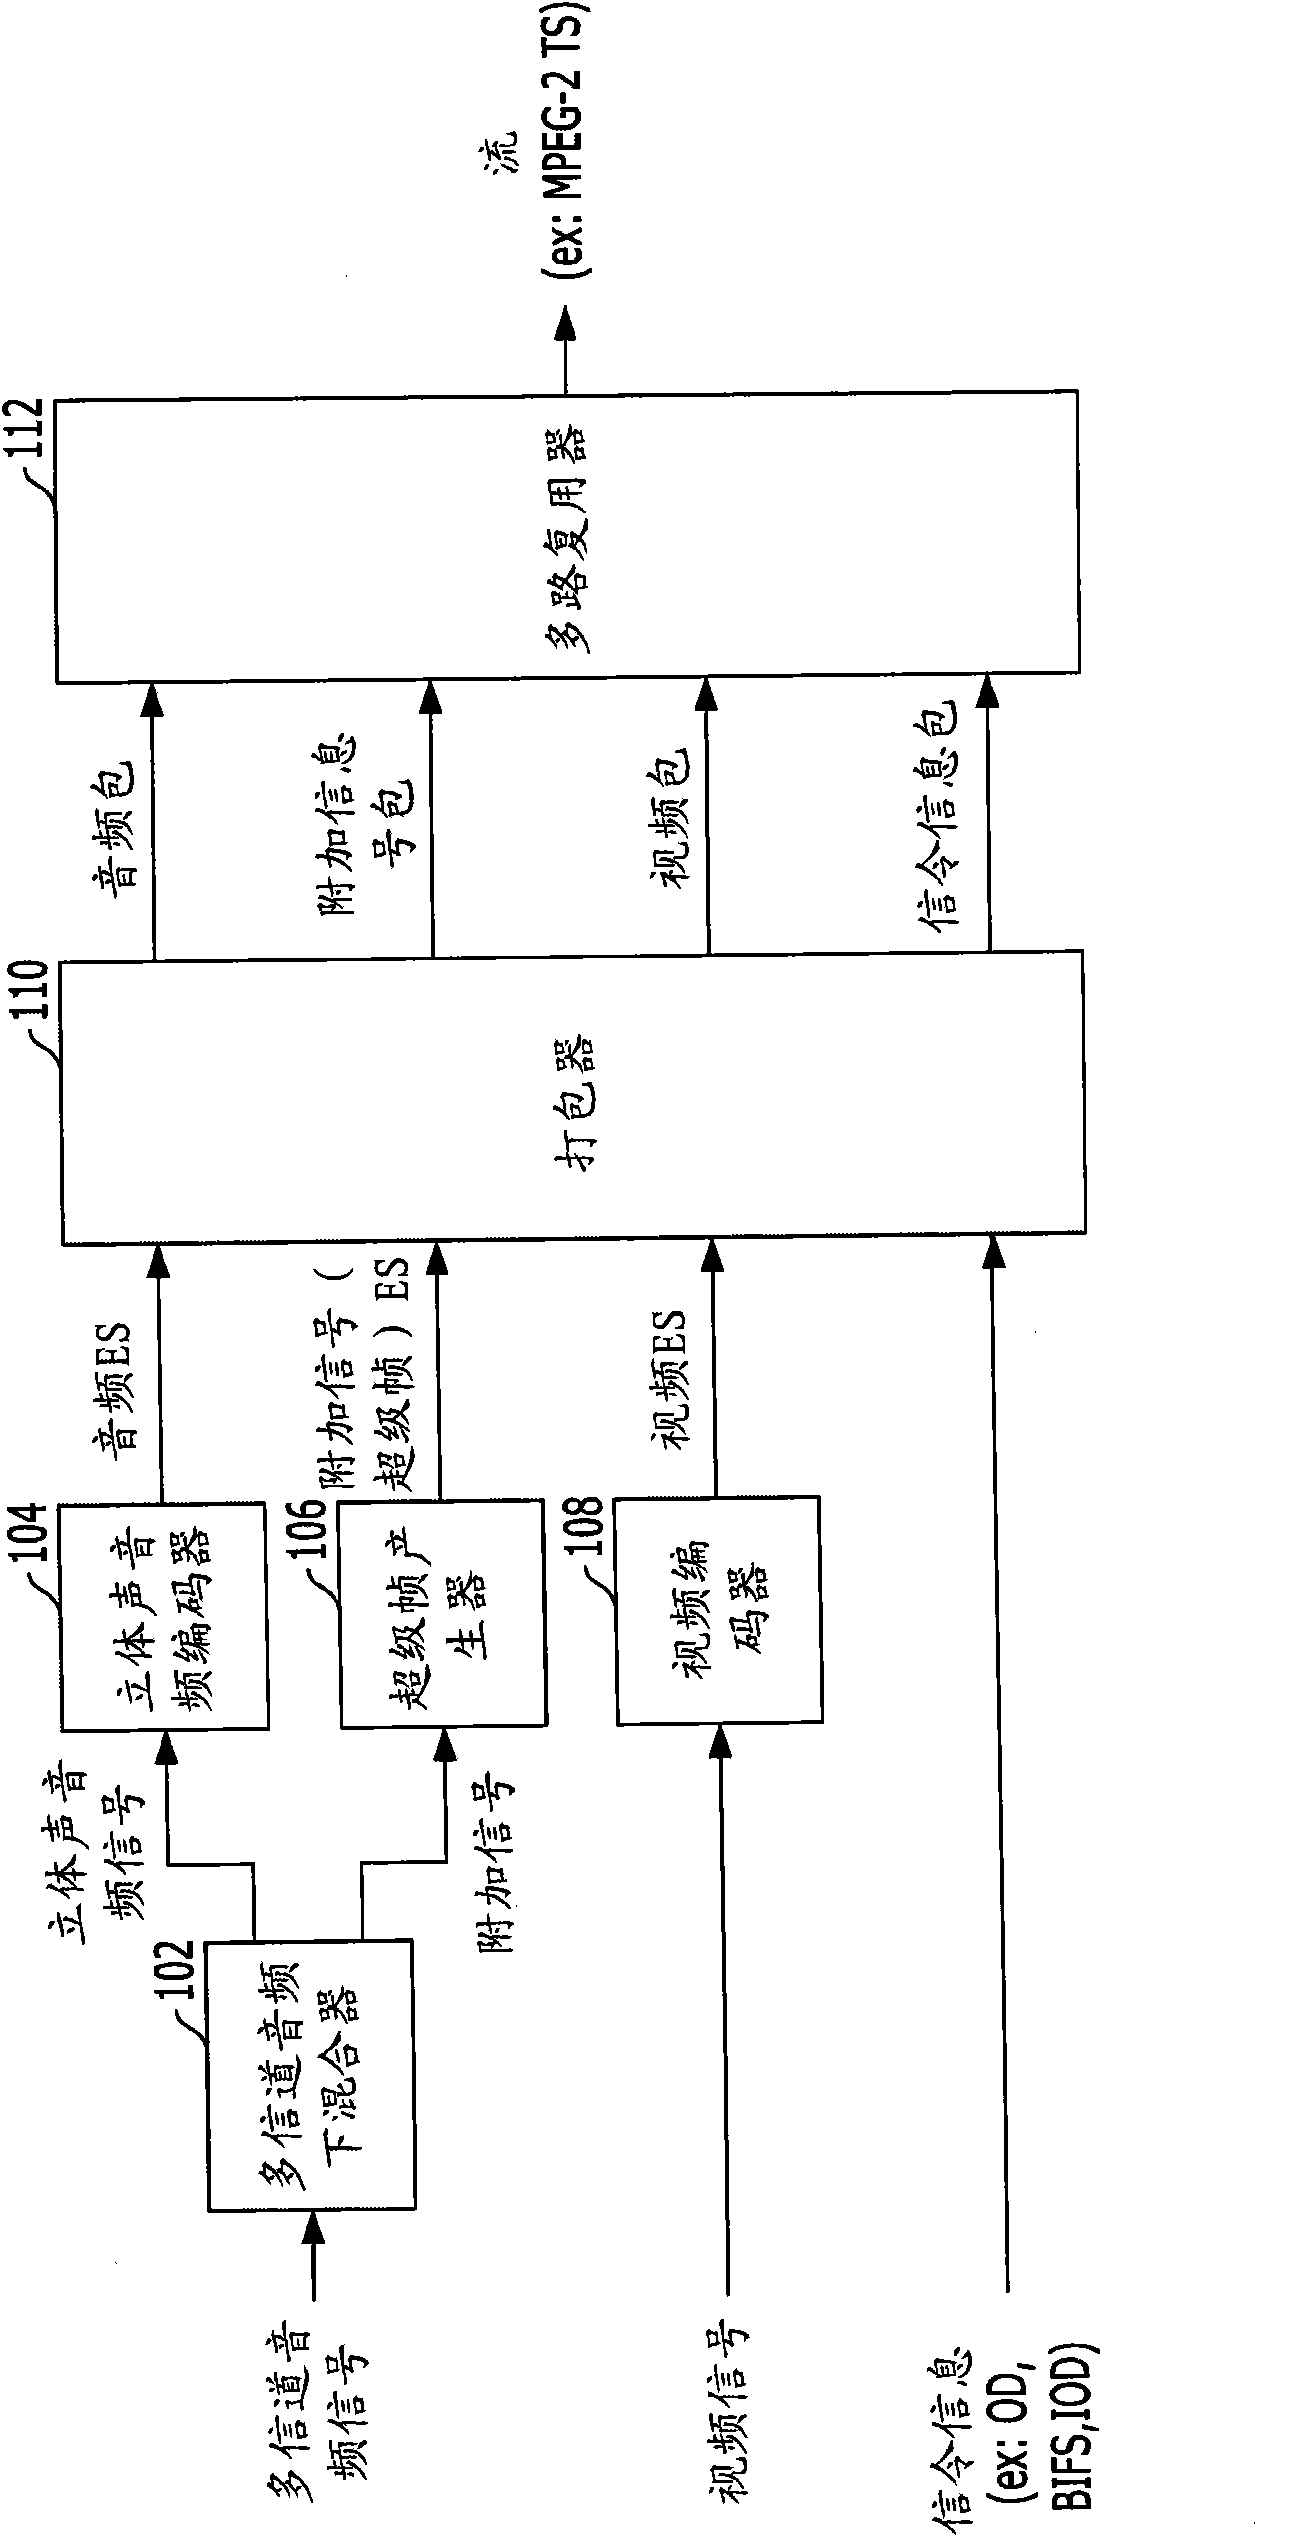 Method and apparatus for transmitting/receiving multi - channel audio signals using super frame